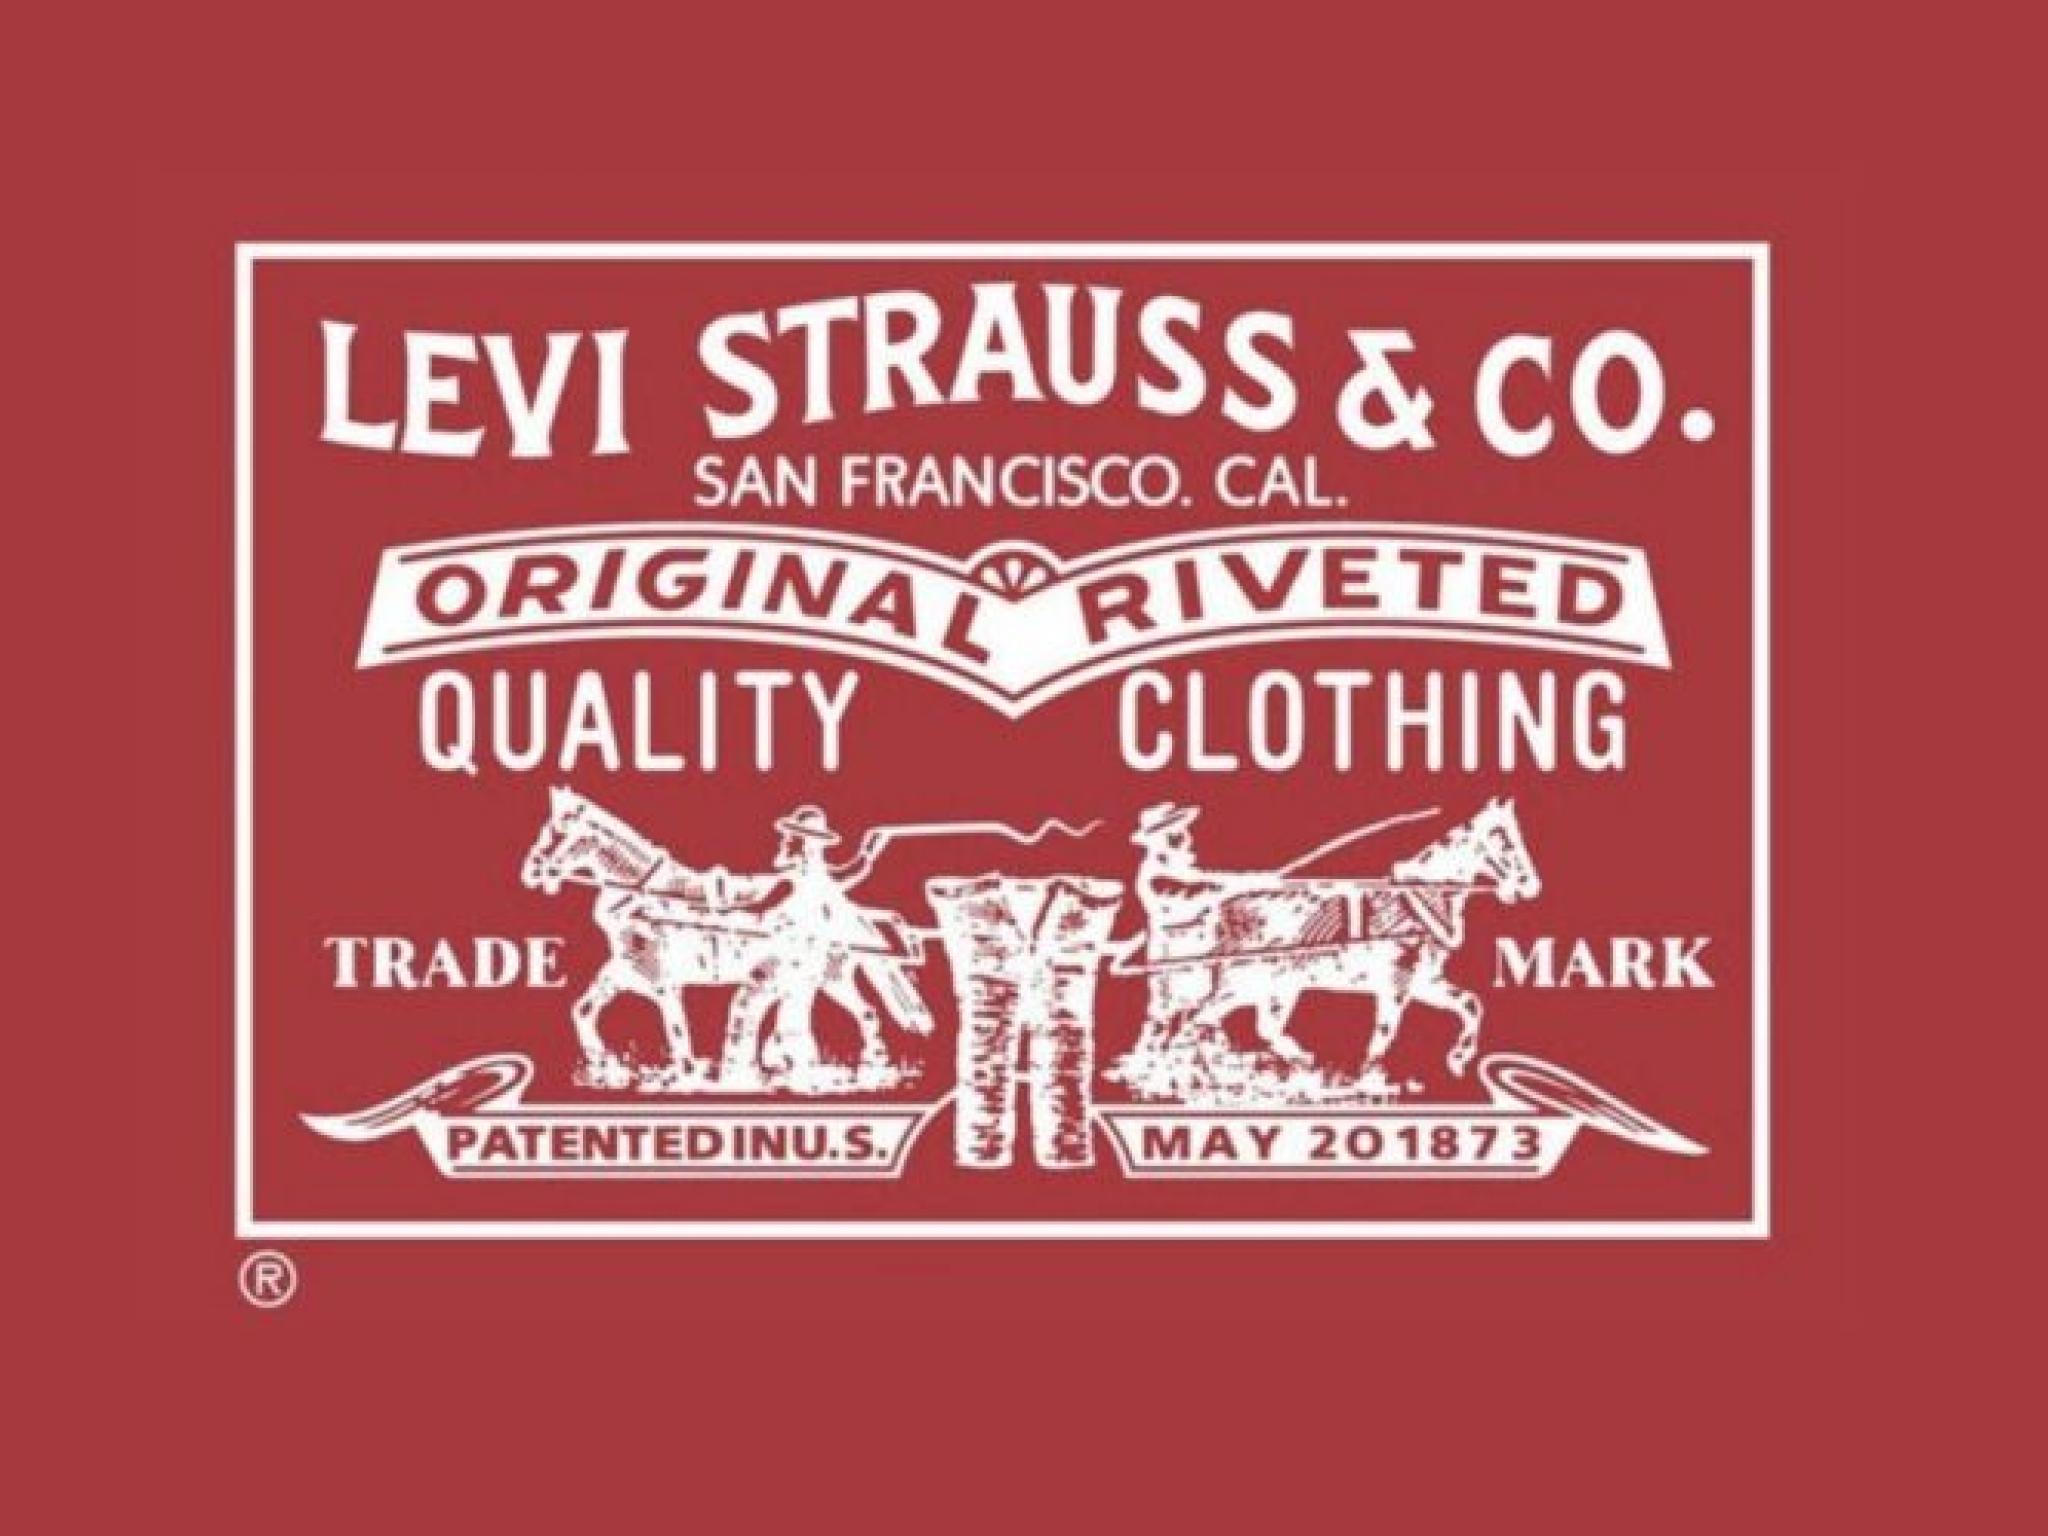  levi-strauss-stock-plummets-on-mixed-q2-results-weak-guidance-the-details 